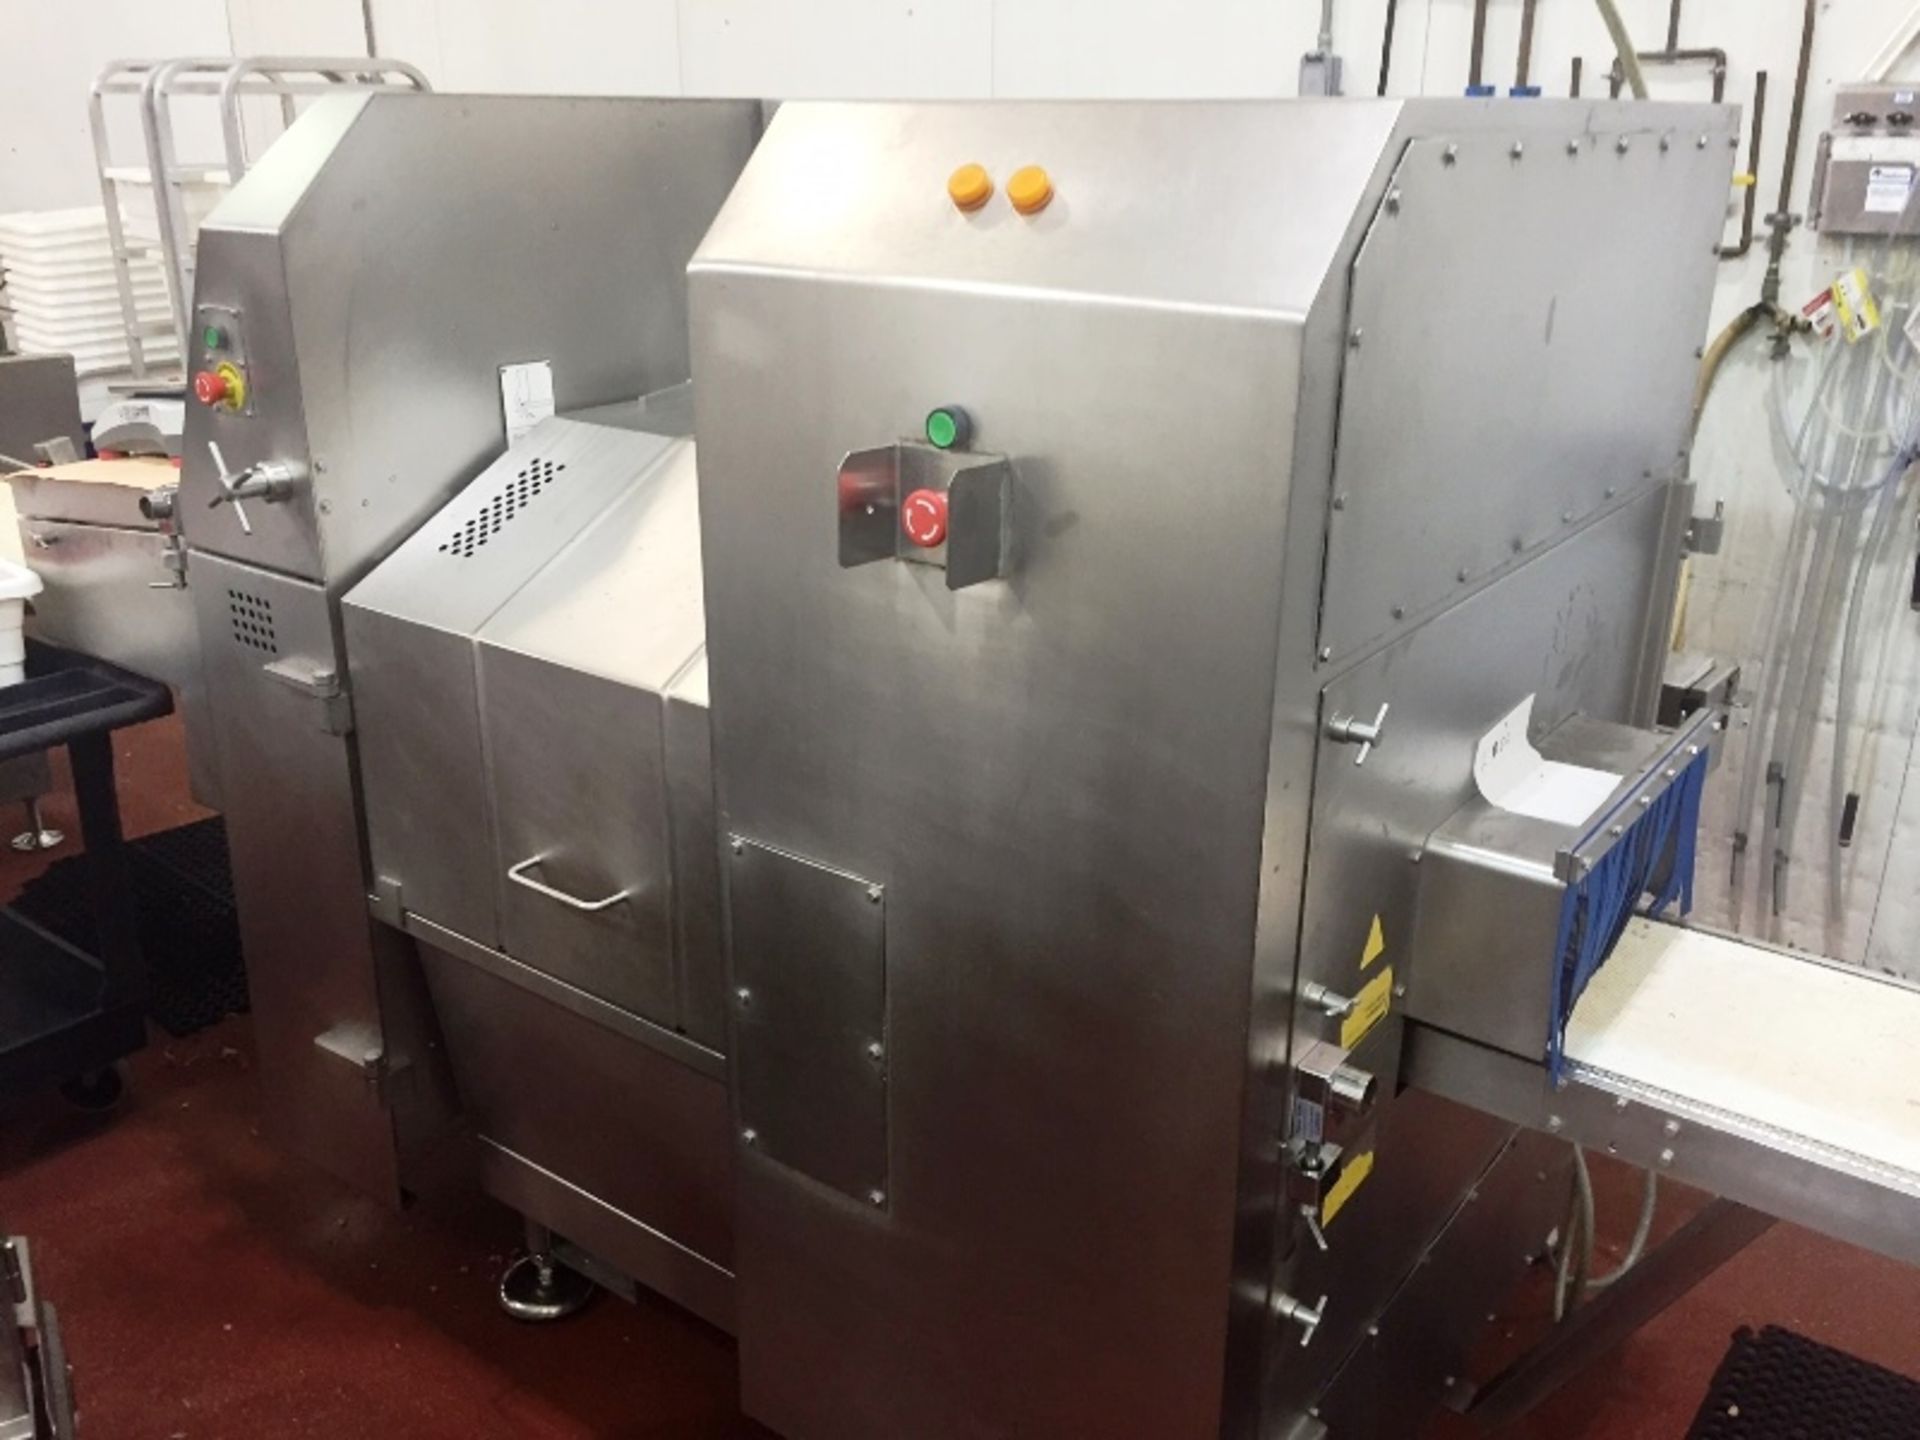 AEW Delford Mdl. SSV Vision Slicer for fresh, non frozen meats, equipped with (3) digital - Bild 3 aus 17